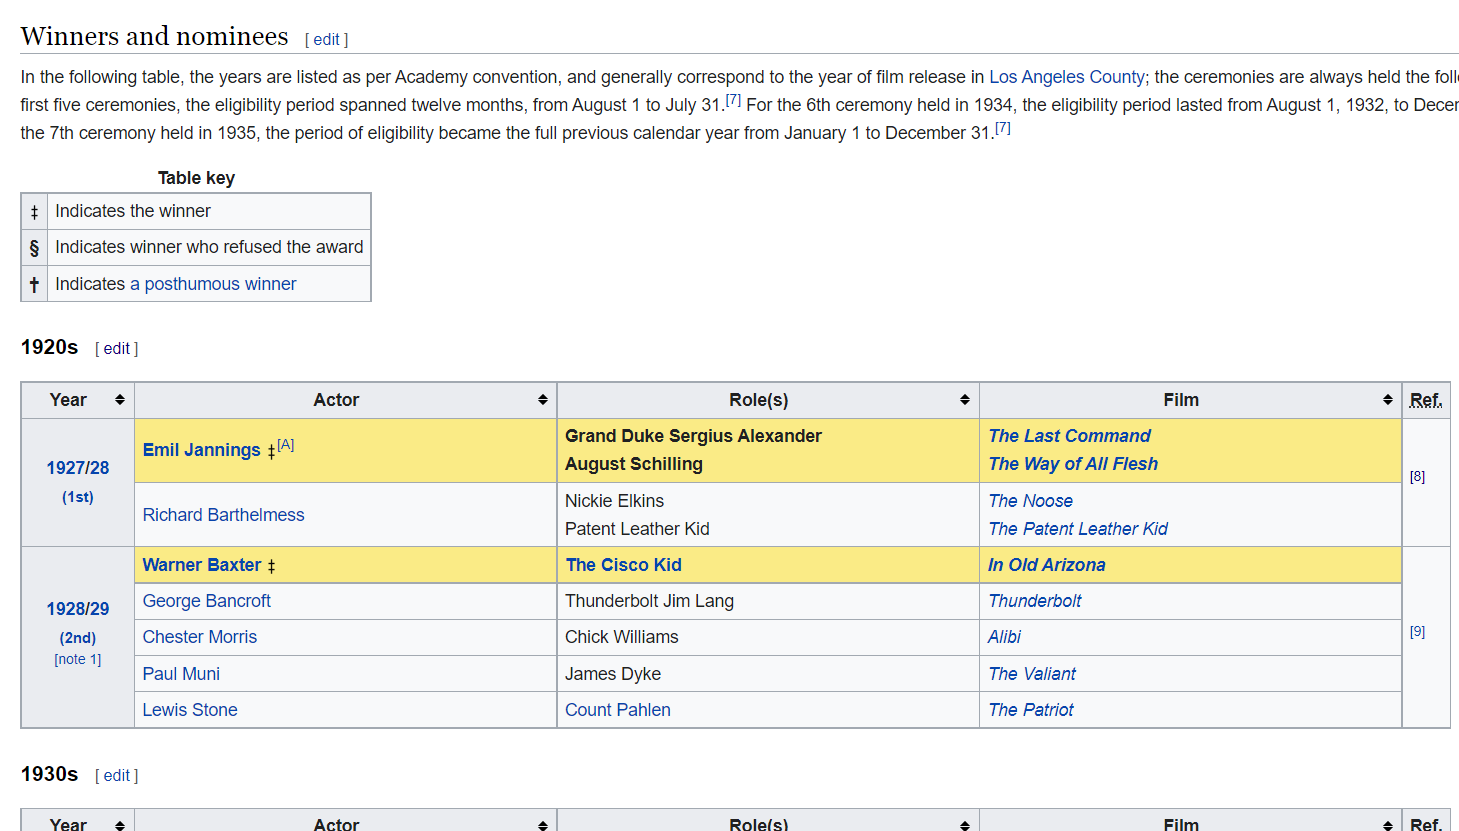 This is the table on wikipedia that has the data I need.